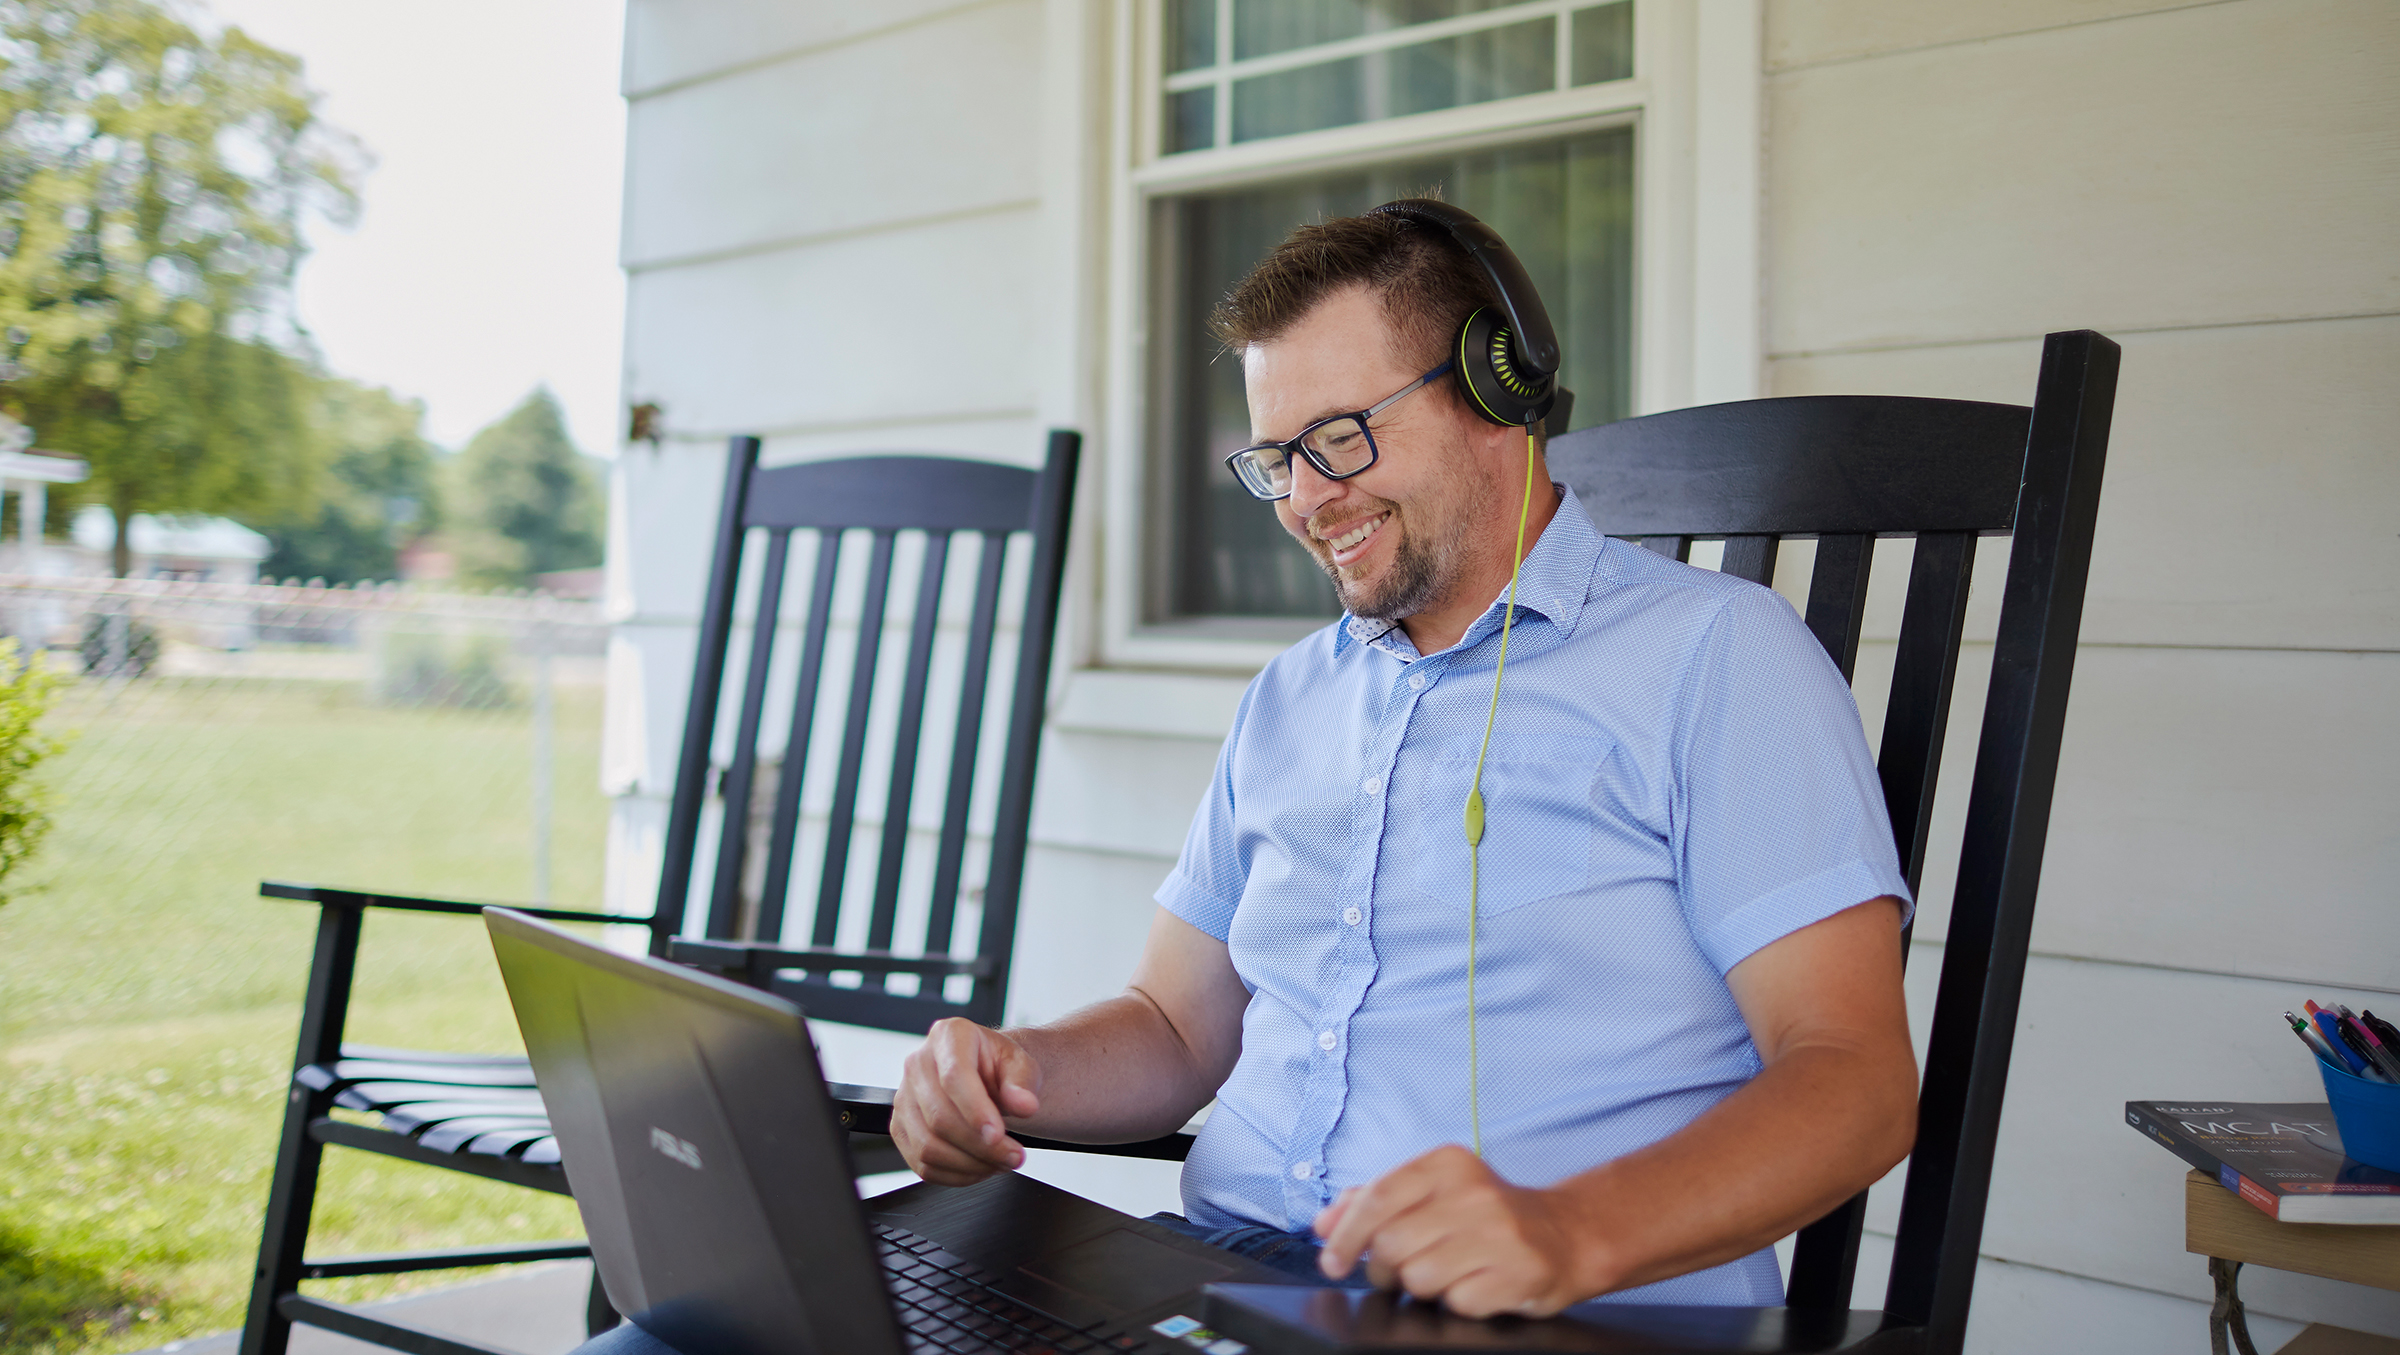 A man sitting in a rocking chair on a porch works on a laptop while wearing headphones